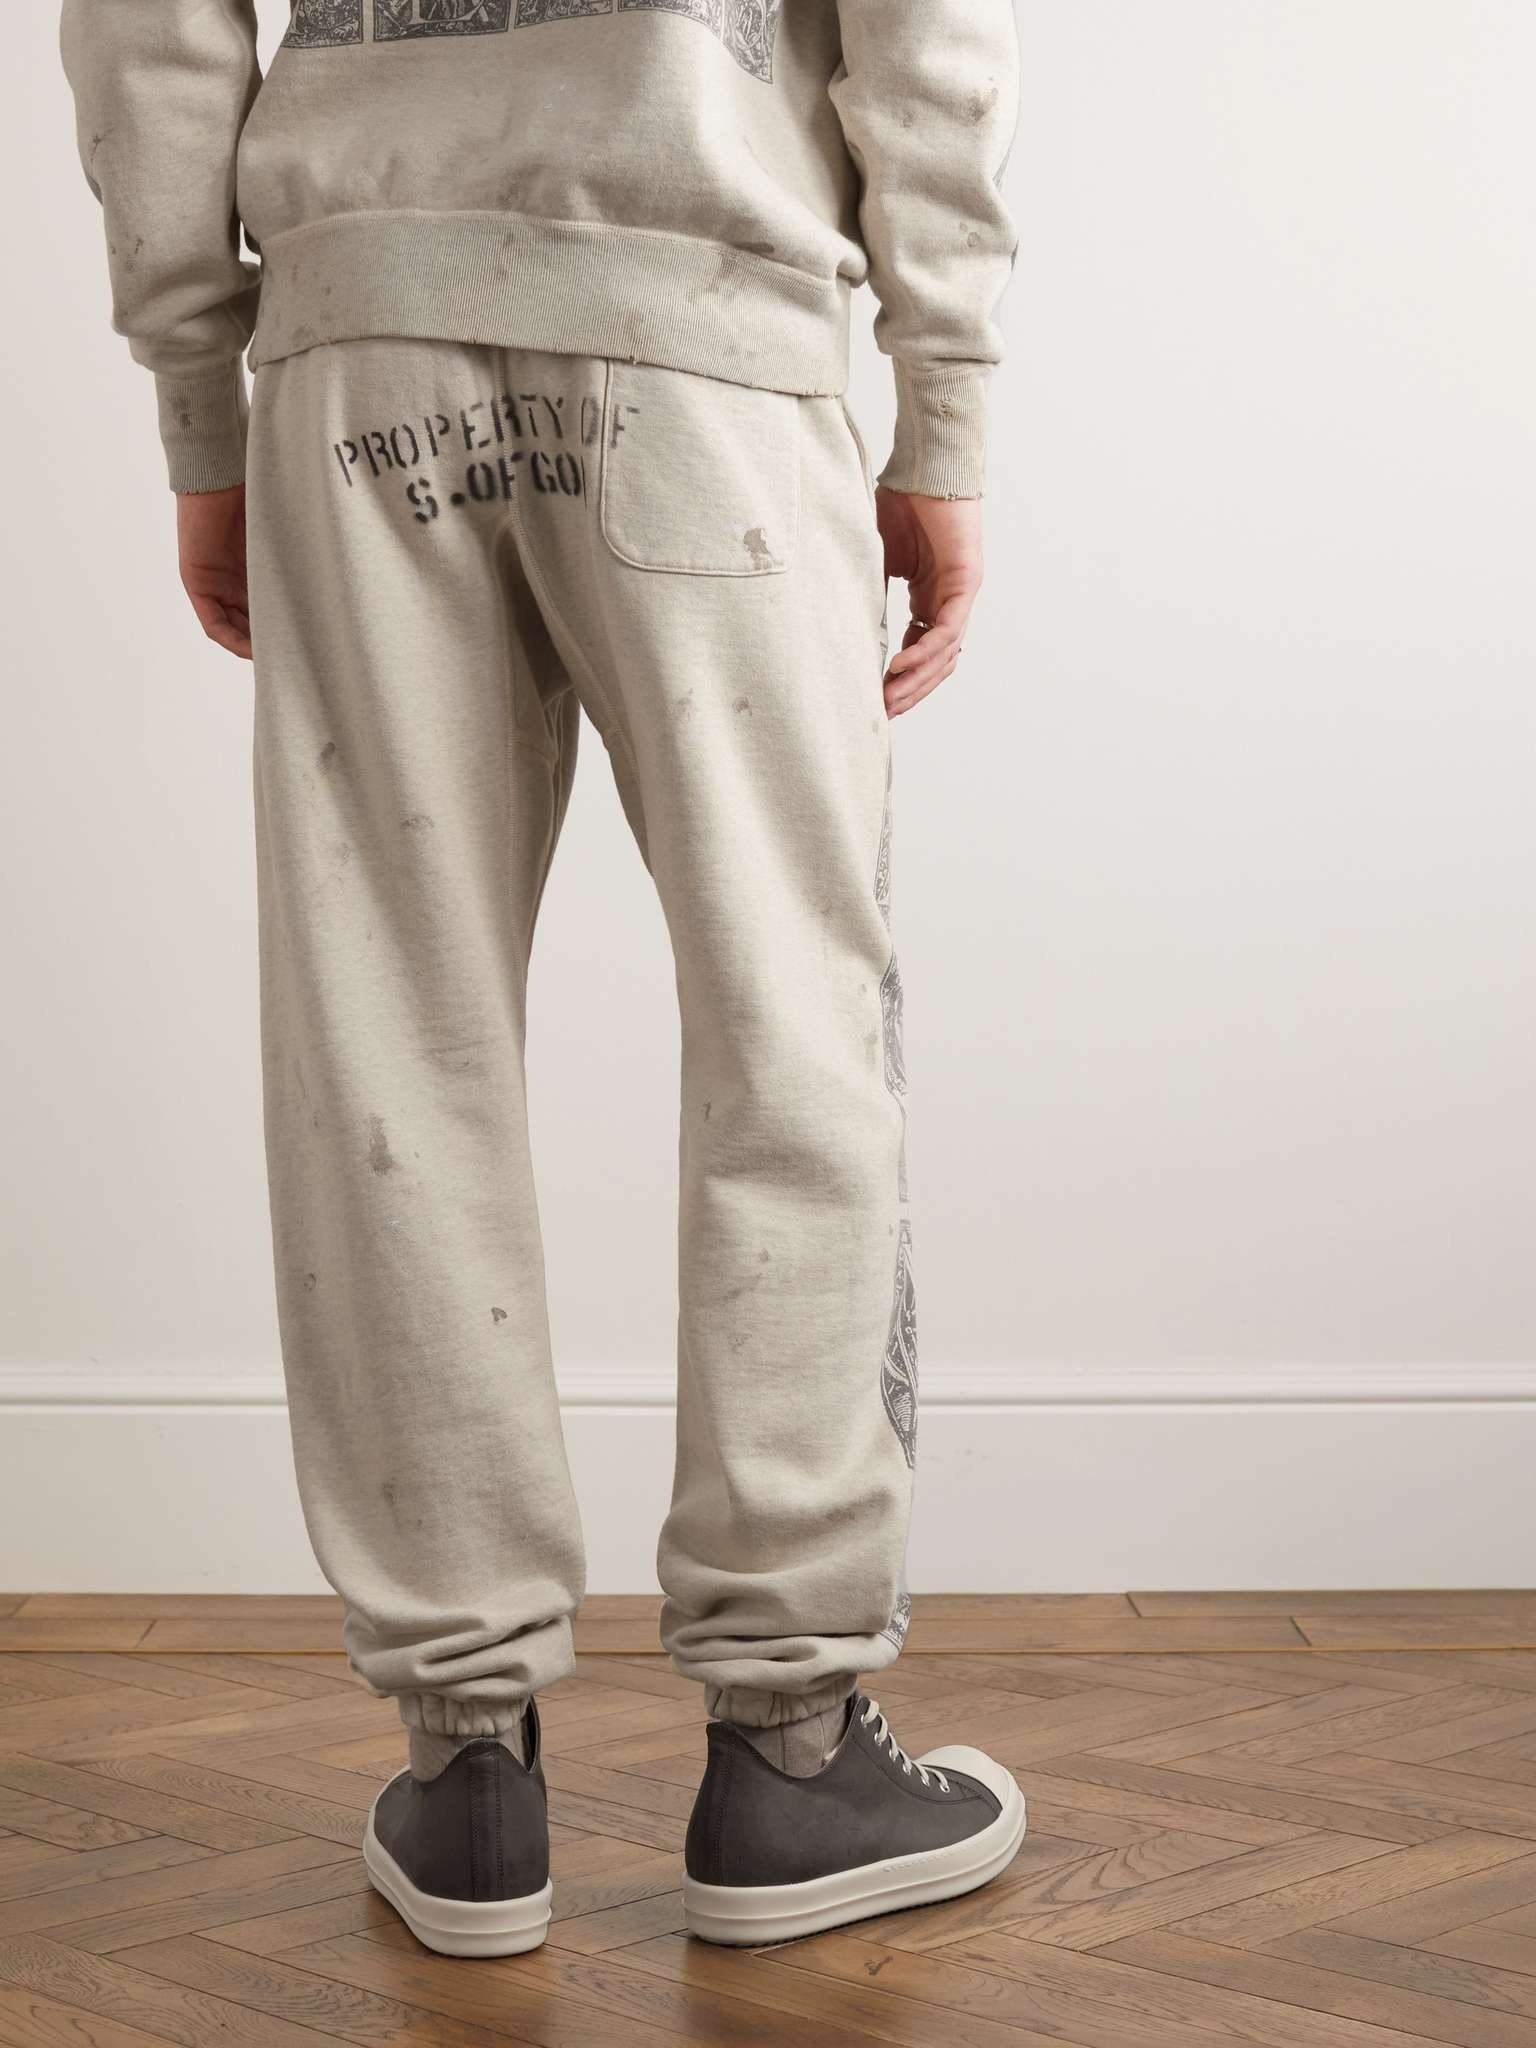 + Denim Tears Tapered Printed Distressed Cotton-Jersey Sweatpants - 4